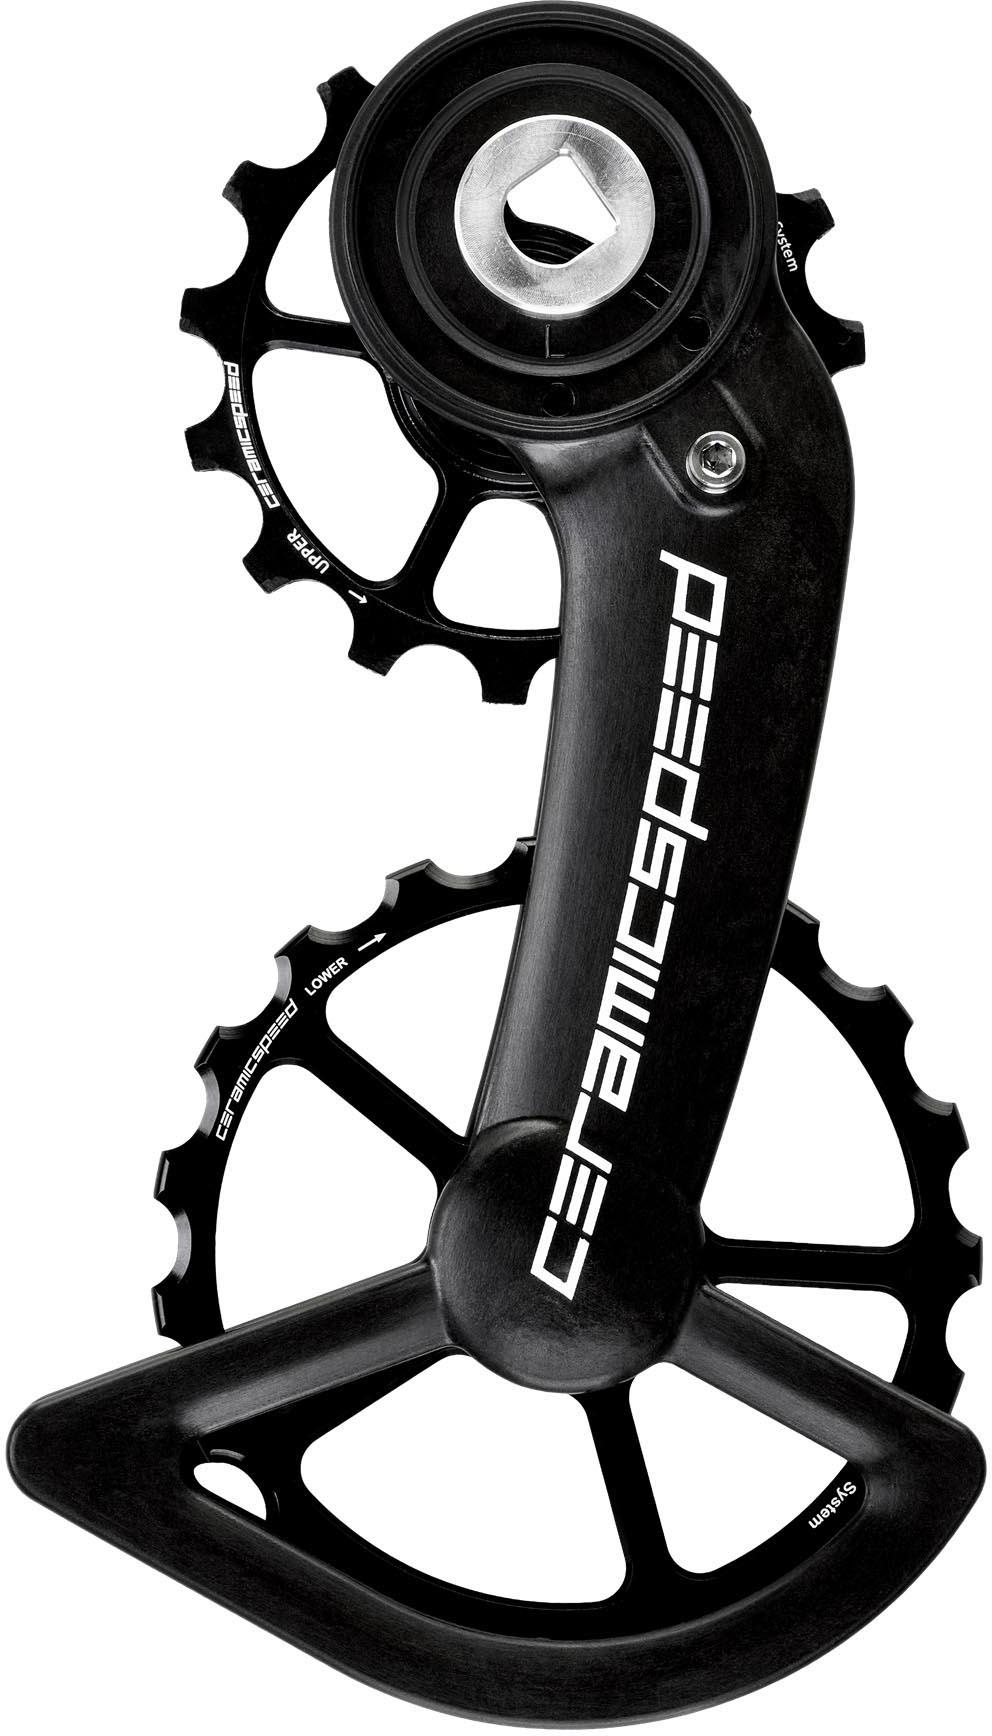 Ceramicspeed Ospw Sram Red And Force Axs - Black